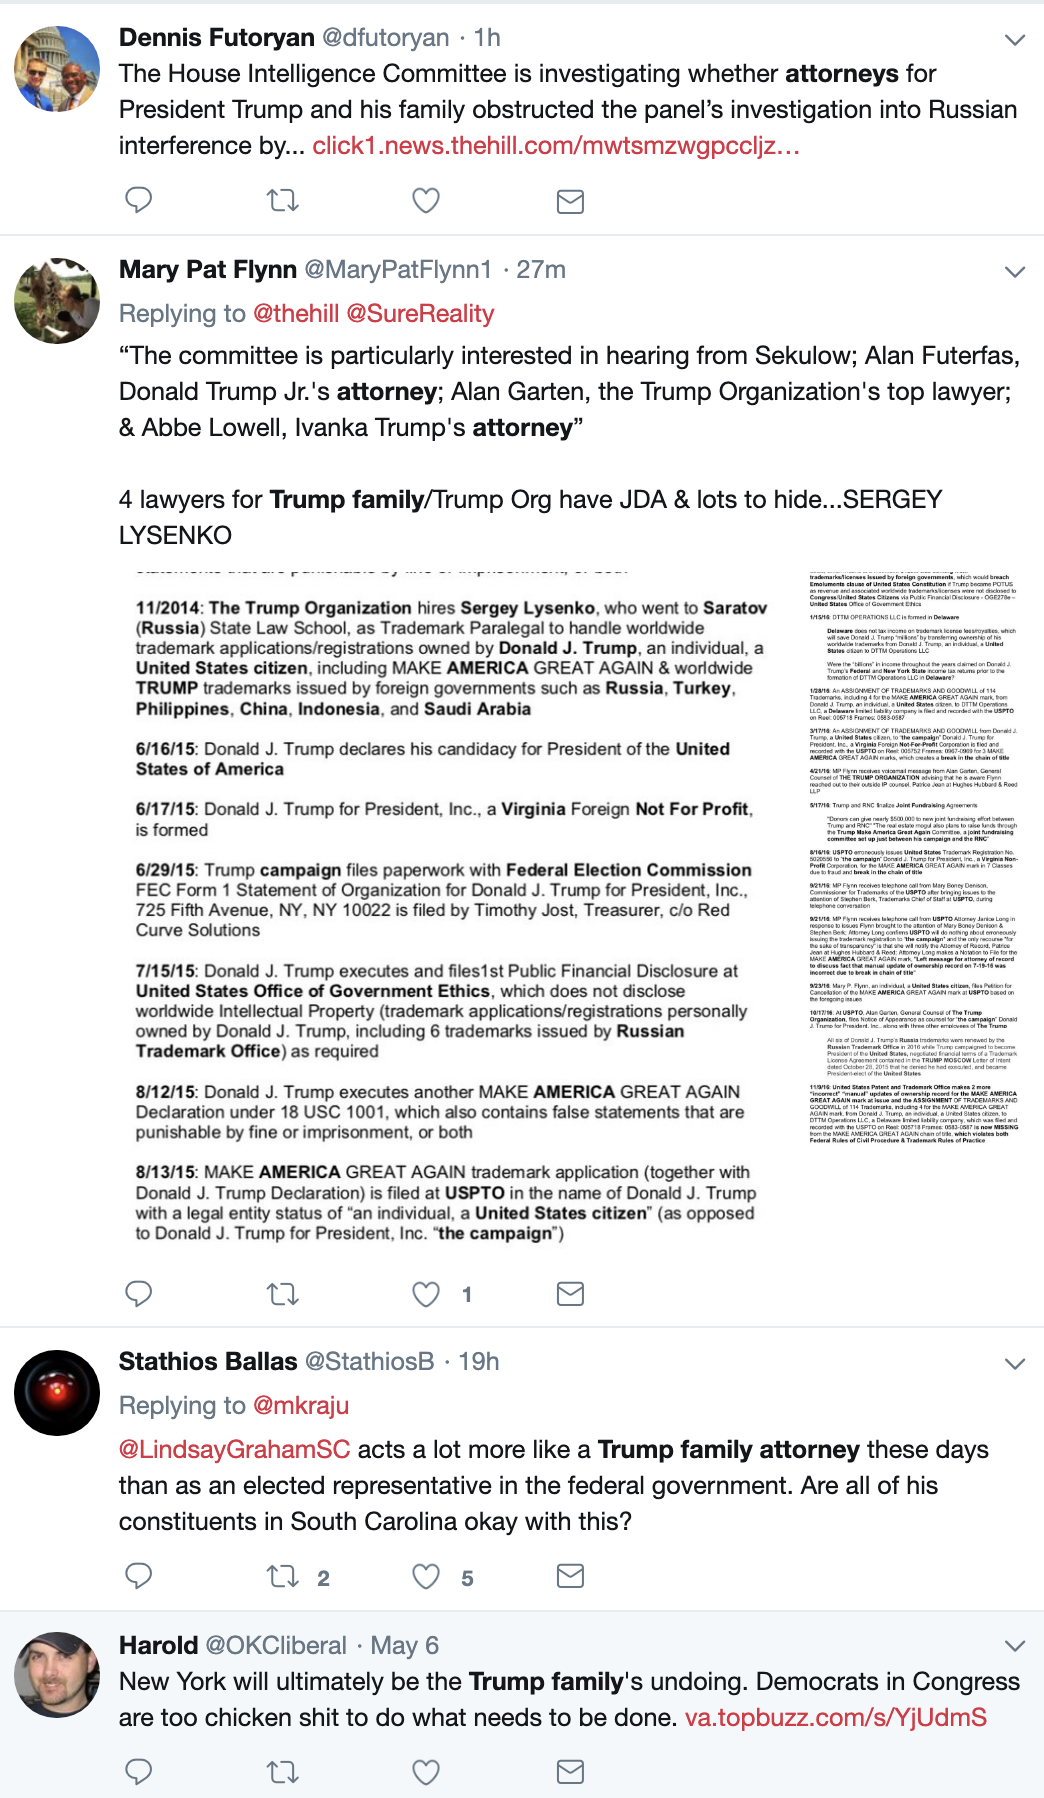 Screen-Shot-2019-05-14-at-4.55.03-PM Trump Family Attorneys Busted For Obstruction Of Justice Corruption Crime Donald Trump Election 2016 Investigation Mueller Politics Robert Mueller Russia Top Stories 